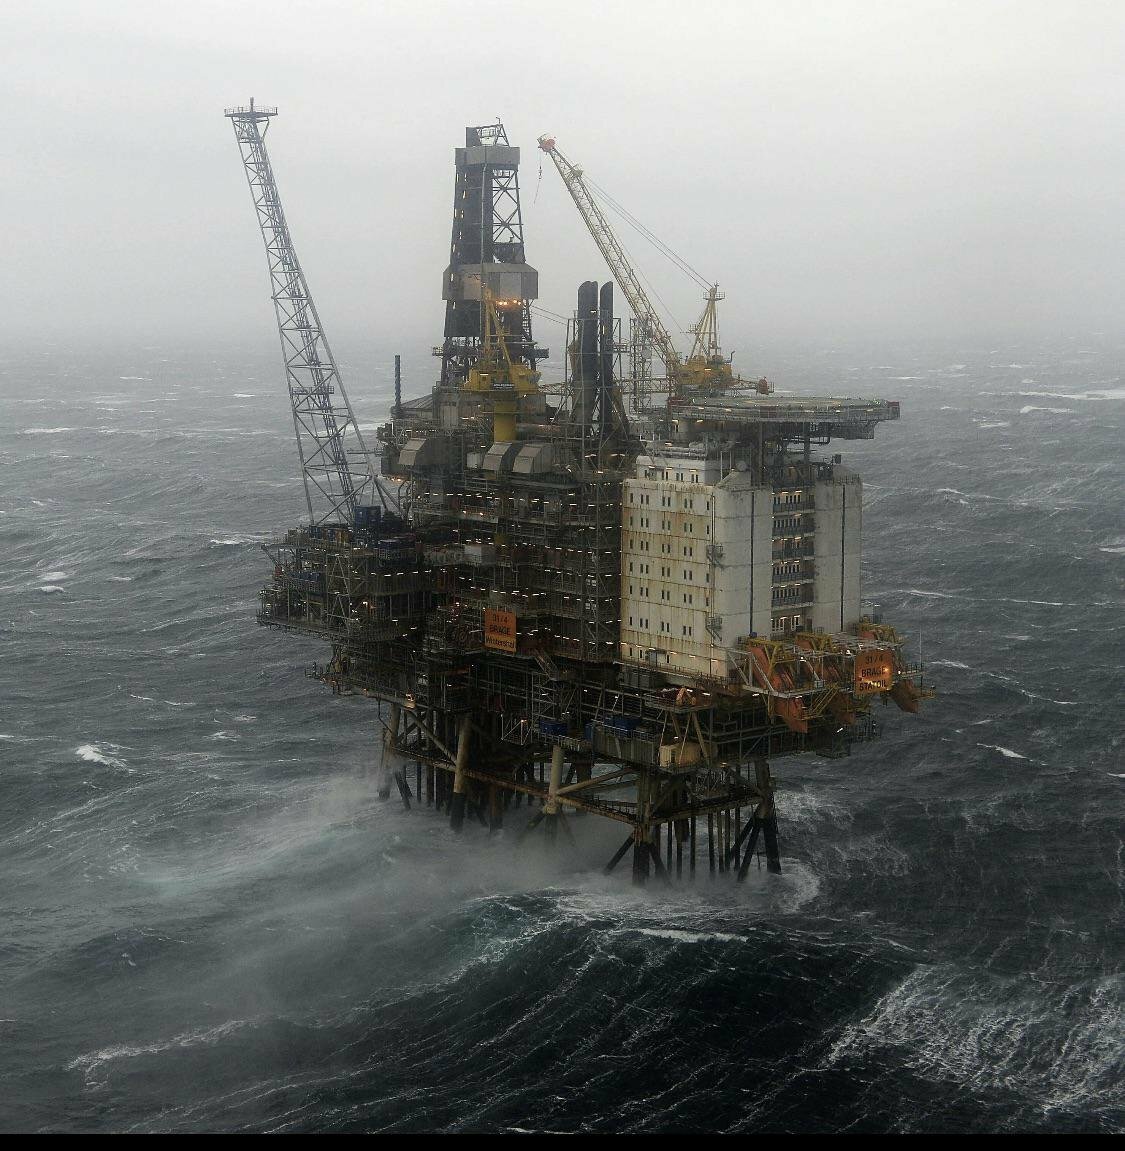 Oil Rig In Brage Oil Field Located In The North Sea 120 Km Northwest Of The City Of Bergen